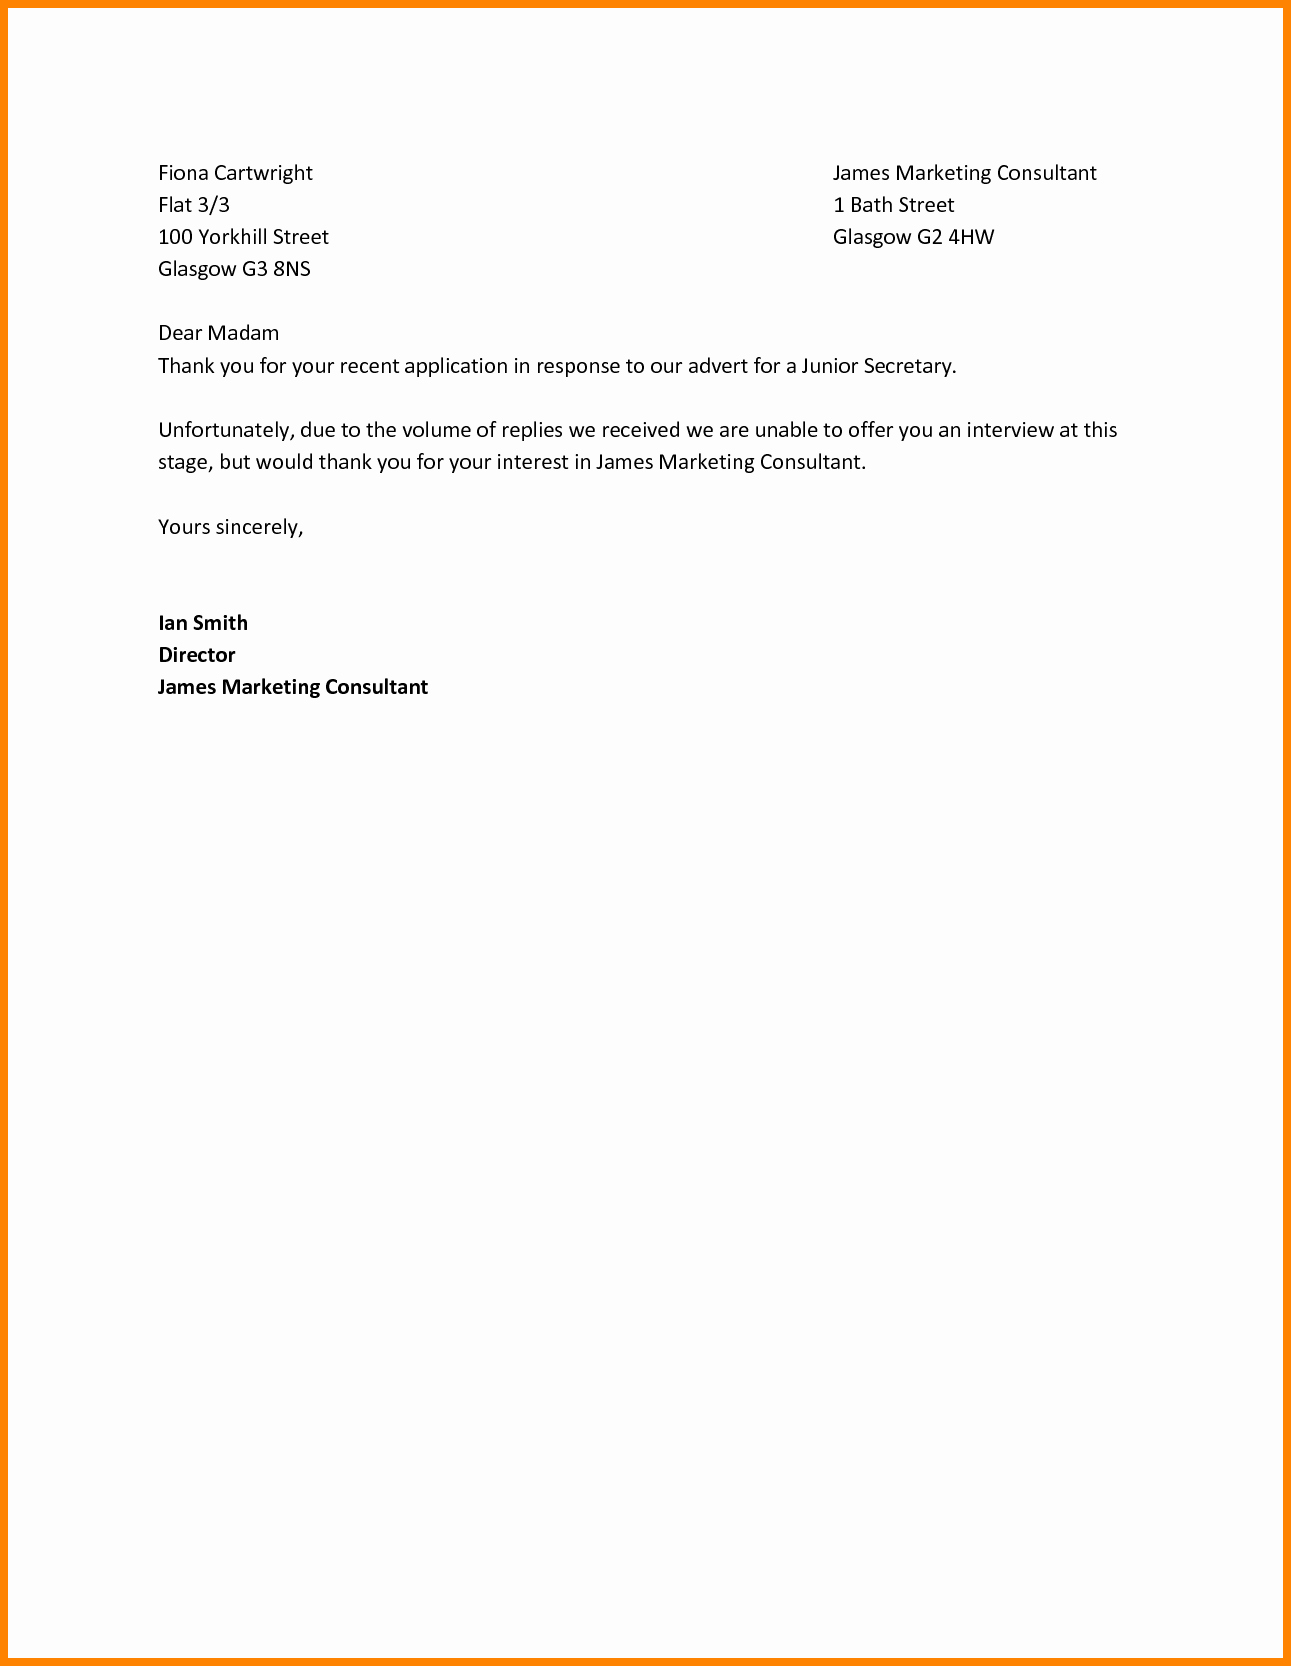 Job Rejection Email Template Fresh 16 Job Rejection Letter Sample to Applicant